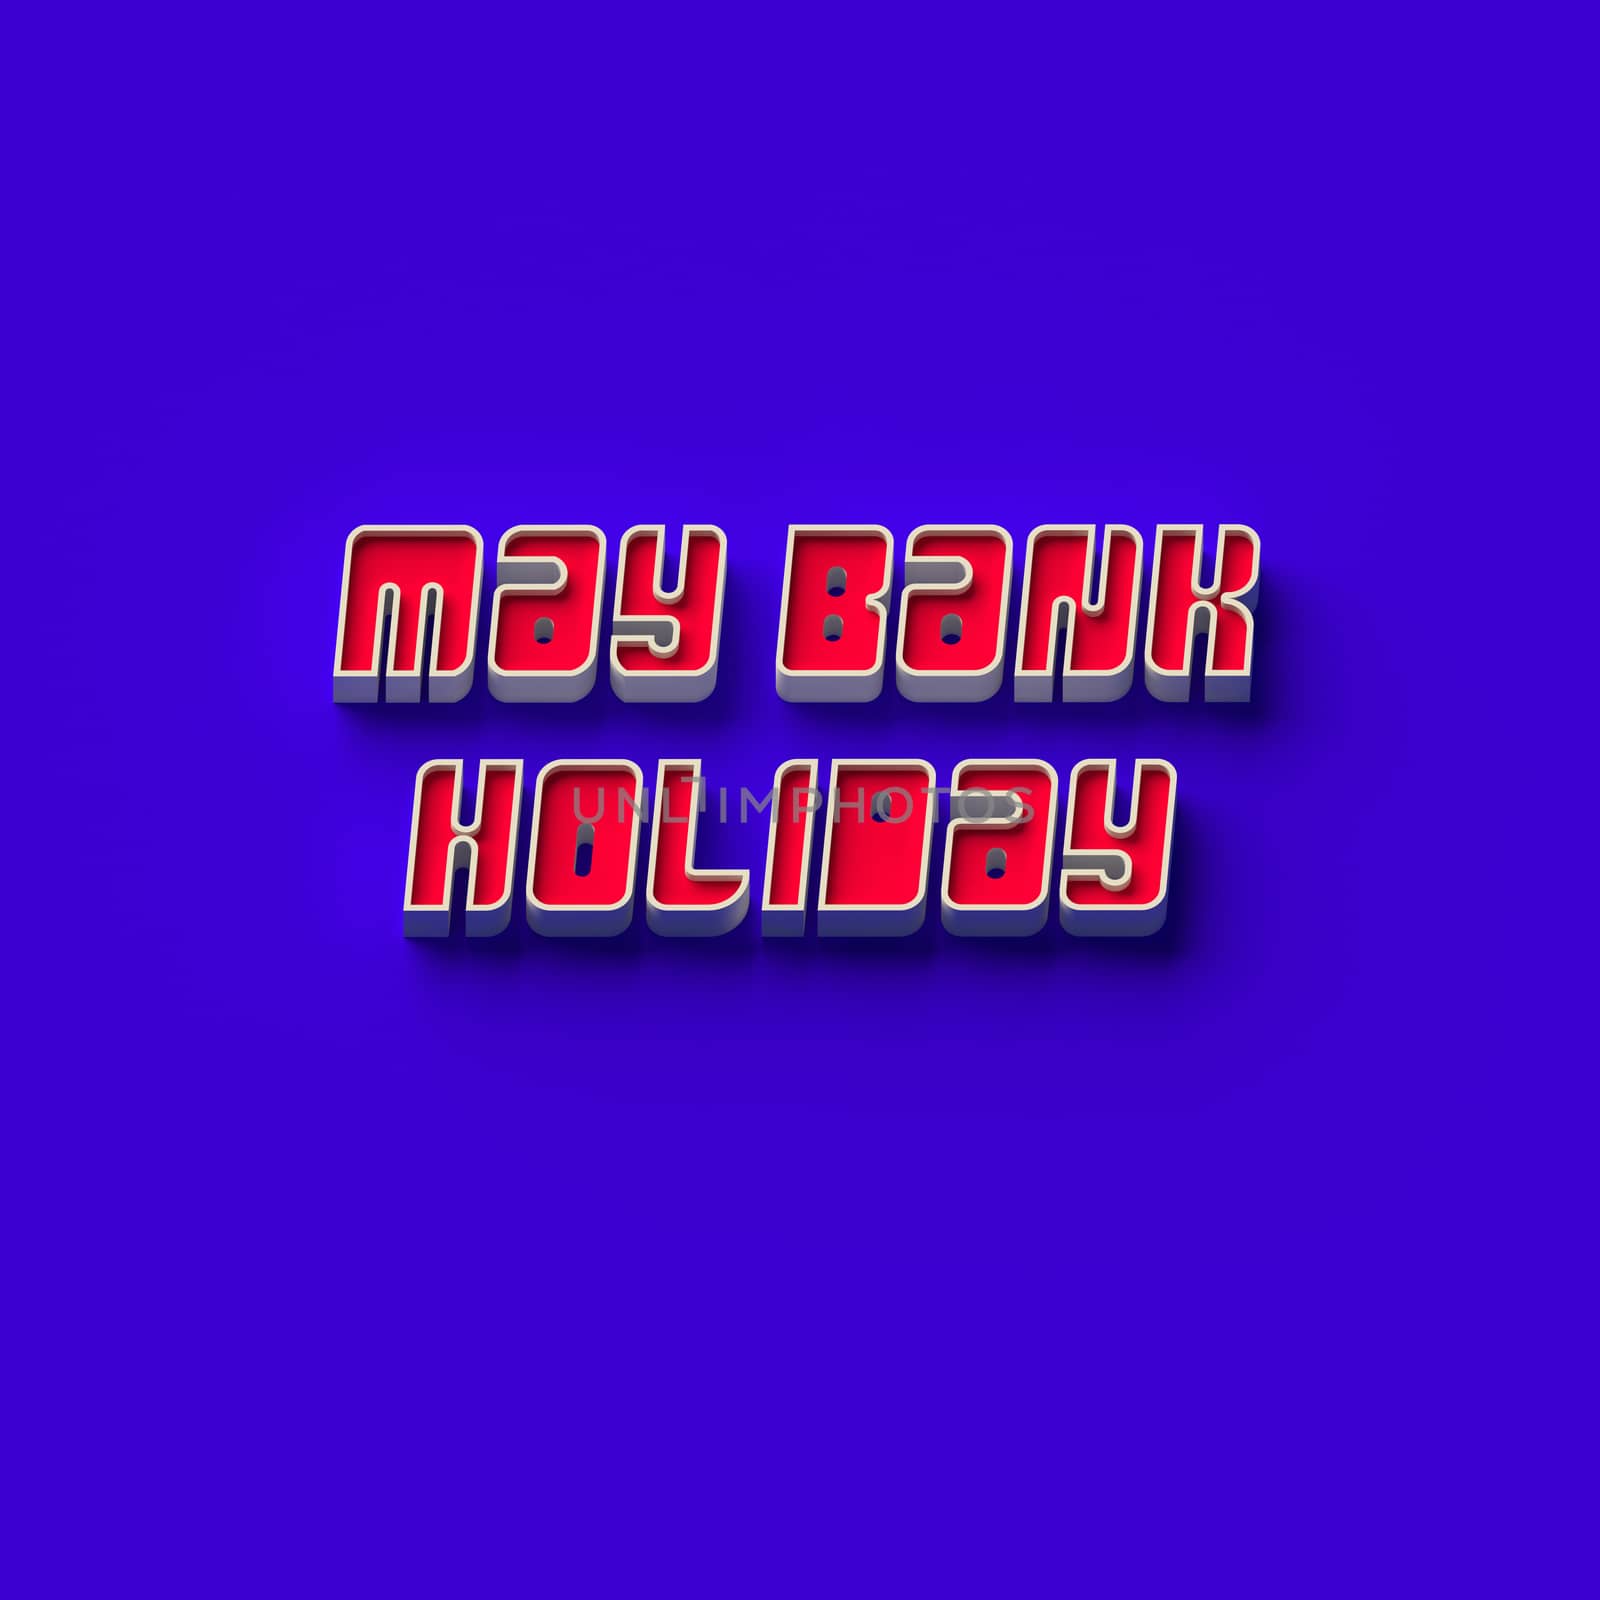 3D RENDERING WORDS "MAY BANK HOLIDAY" by PrettyTG